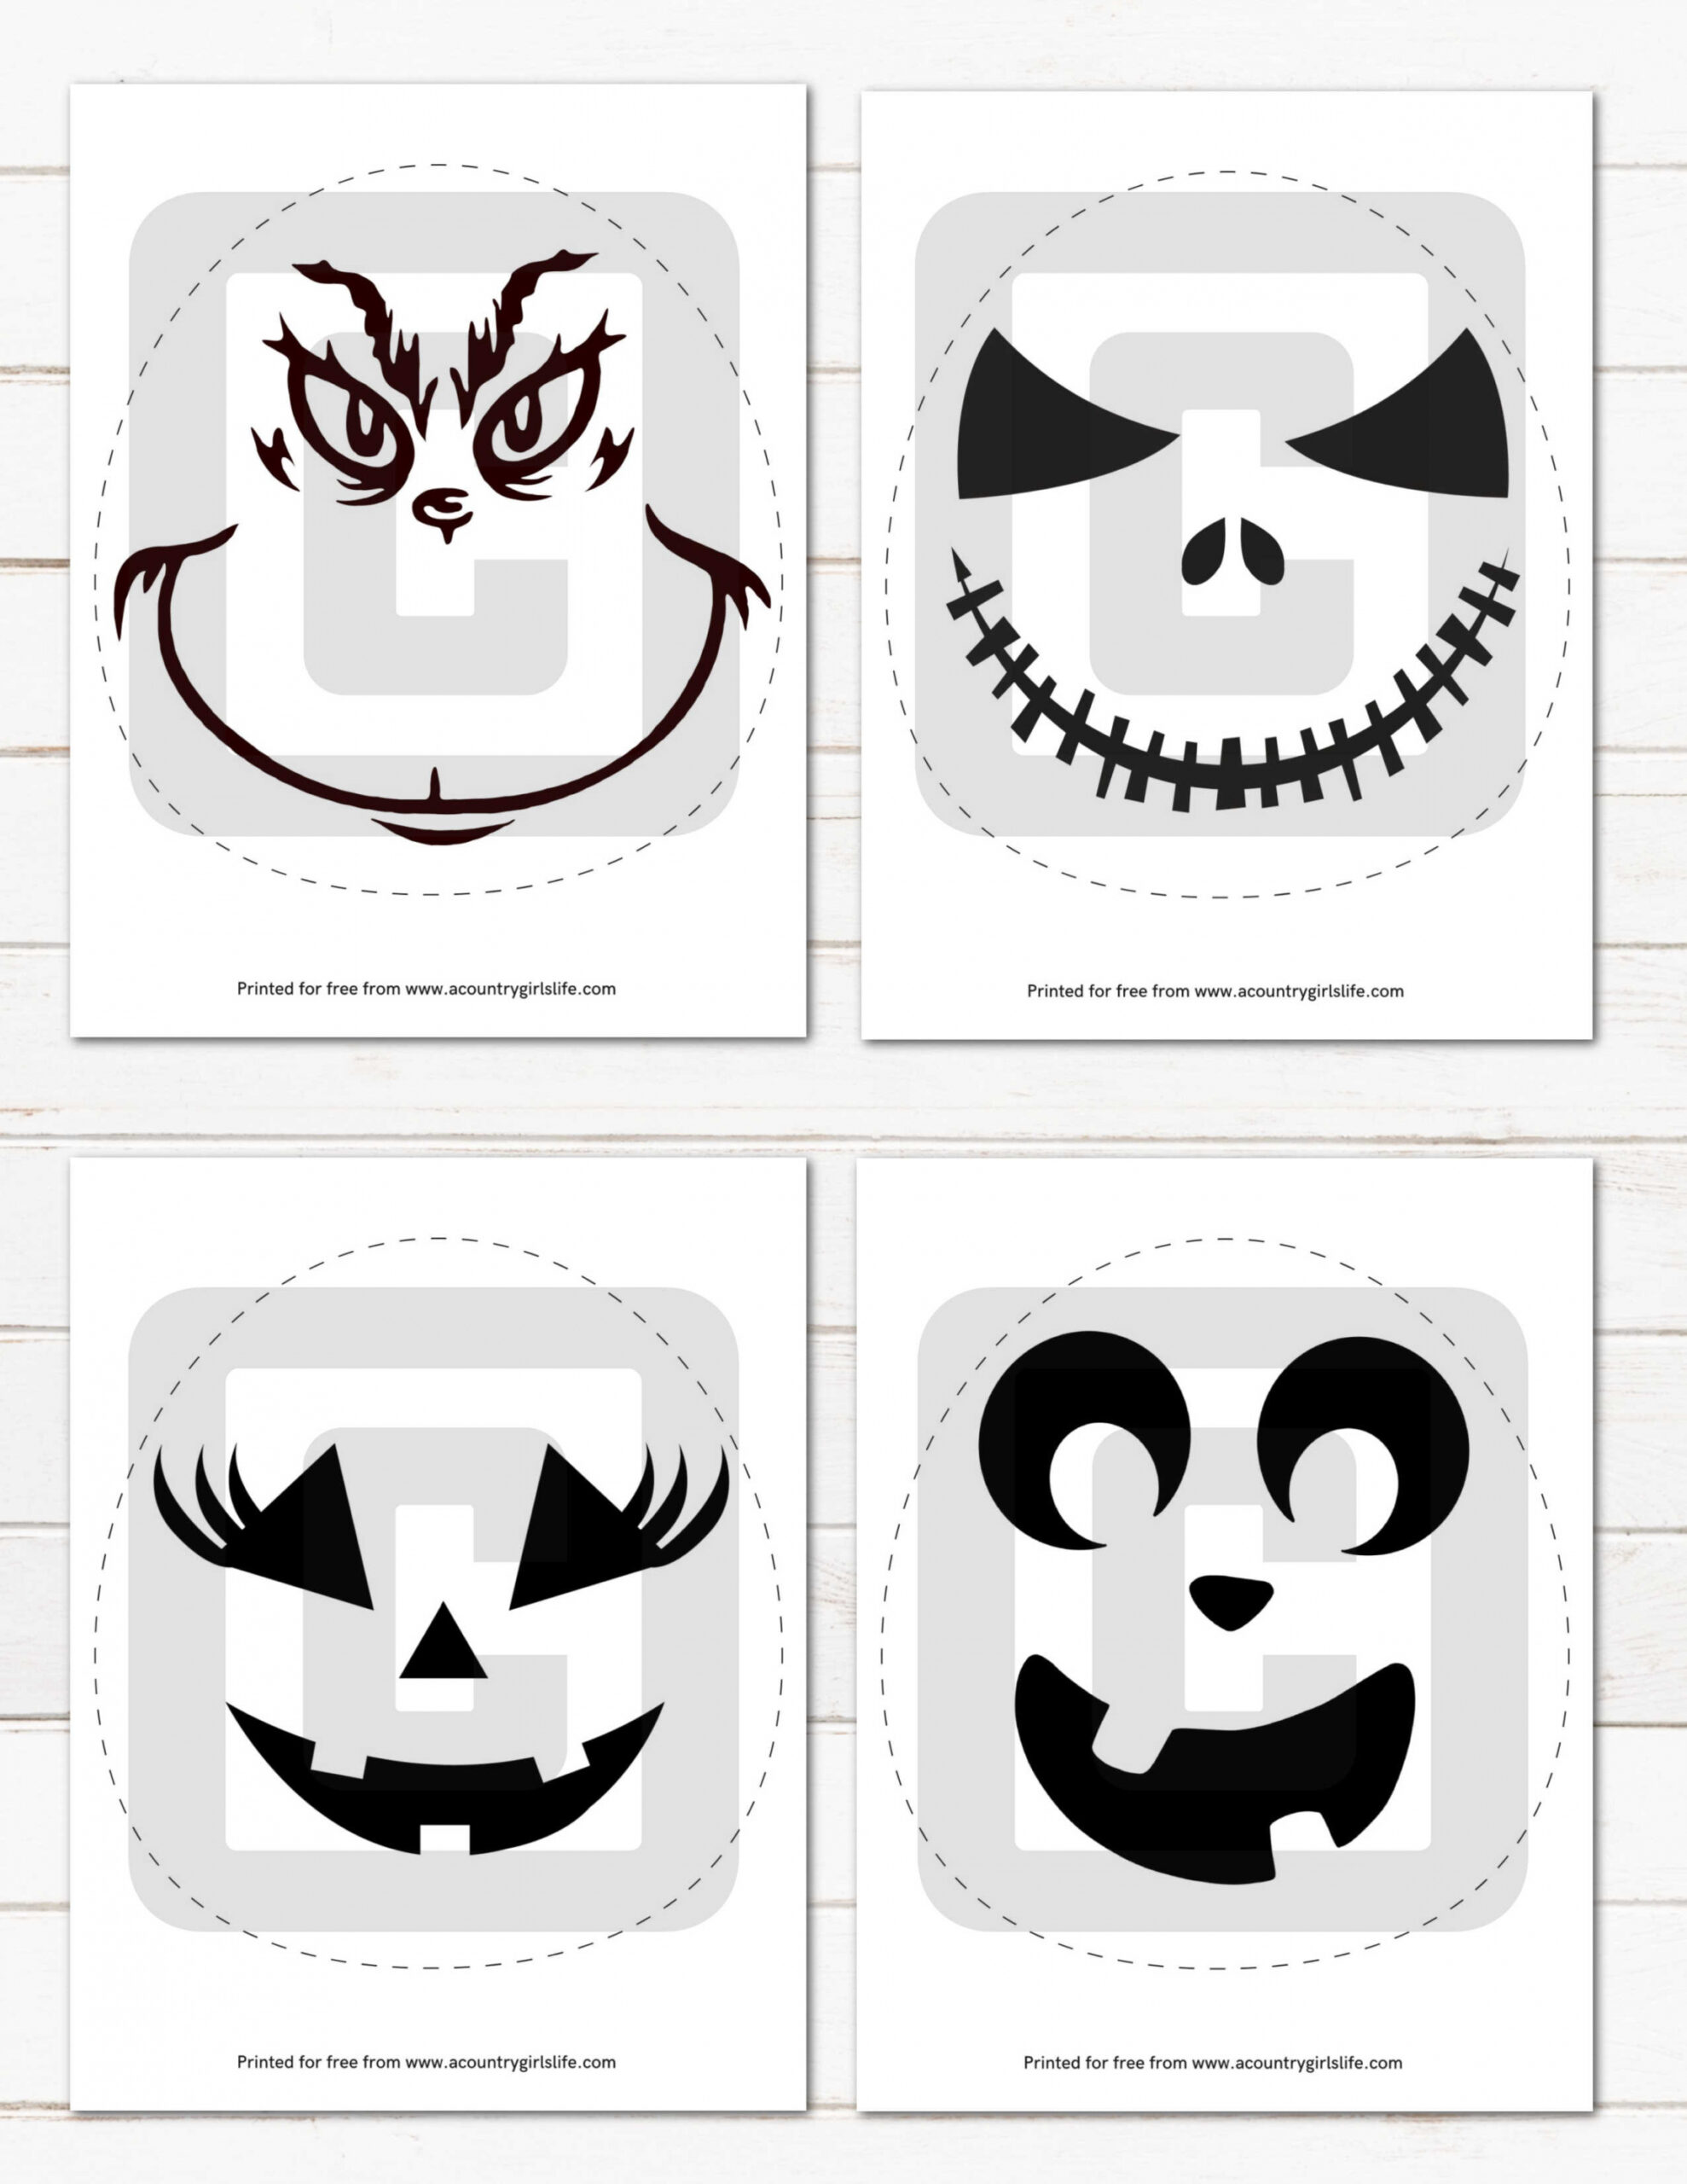 Free Stencils For Pumpkin Carving Printable - Printable - + EASY FREE Printable Pumpkin Carving Stencils! - A Country